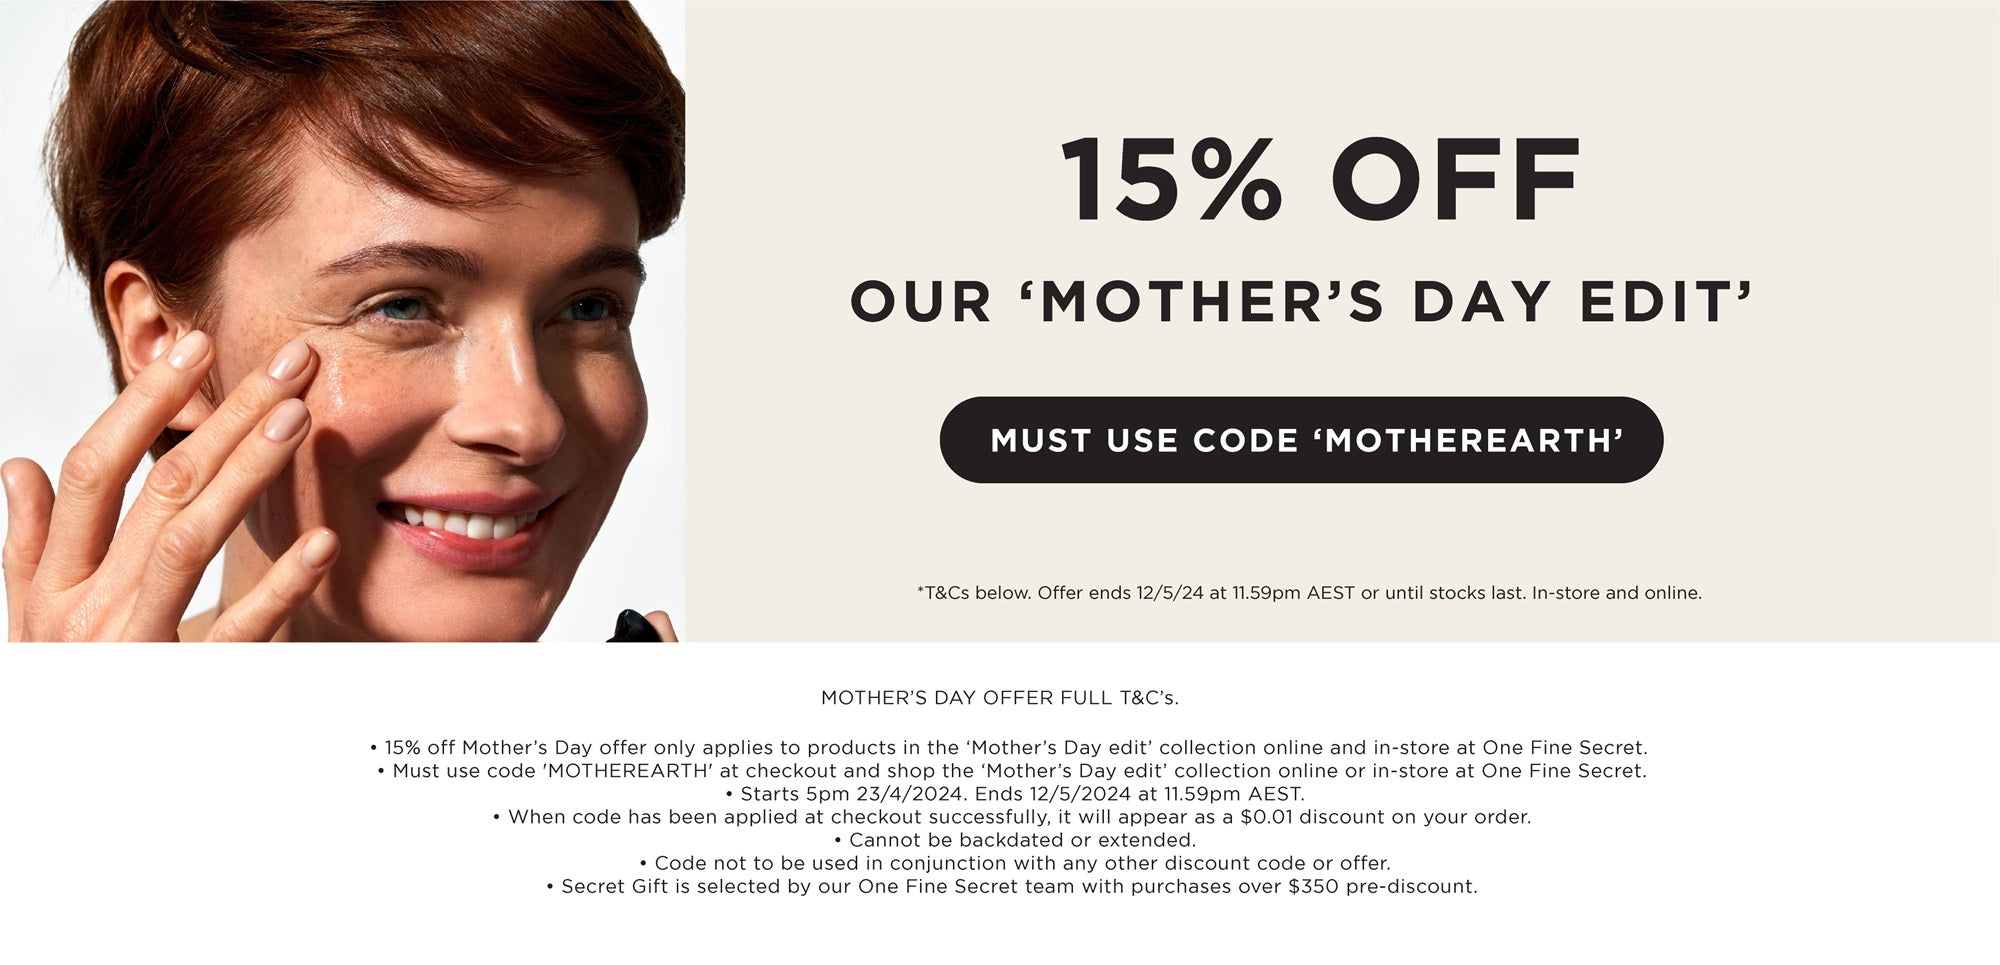 One Fine Secret Mother's Day Discount Offer.